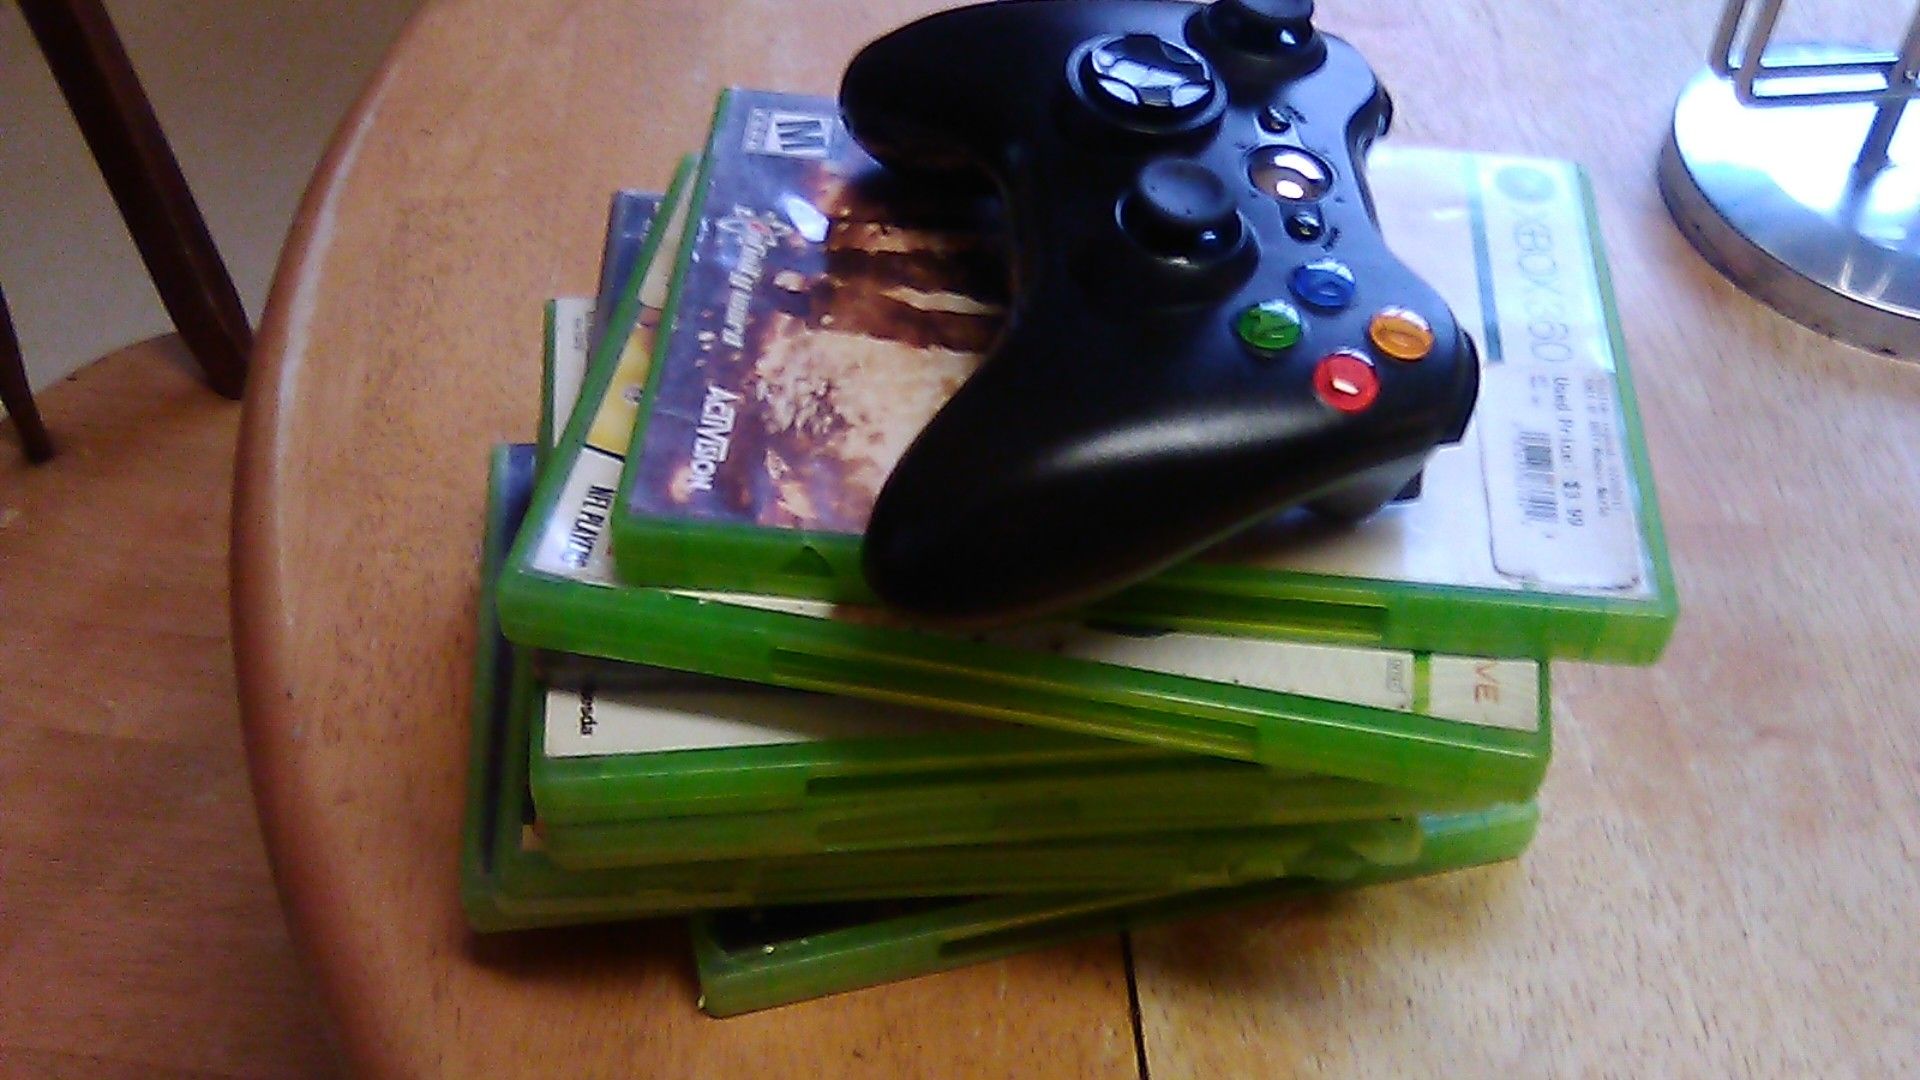 9 xbox 360 video games and controller